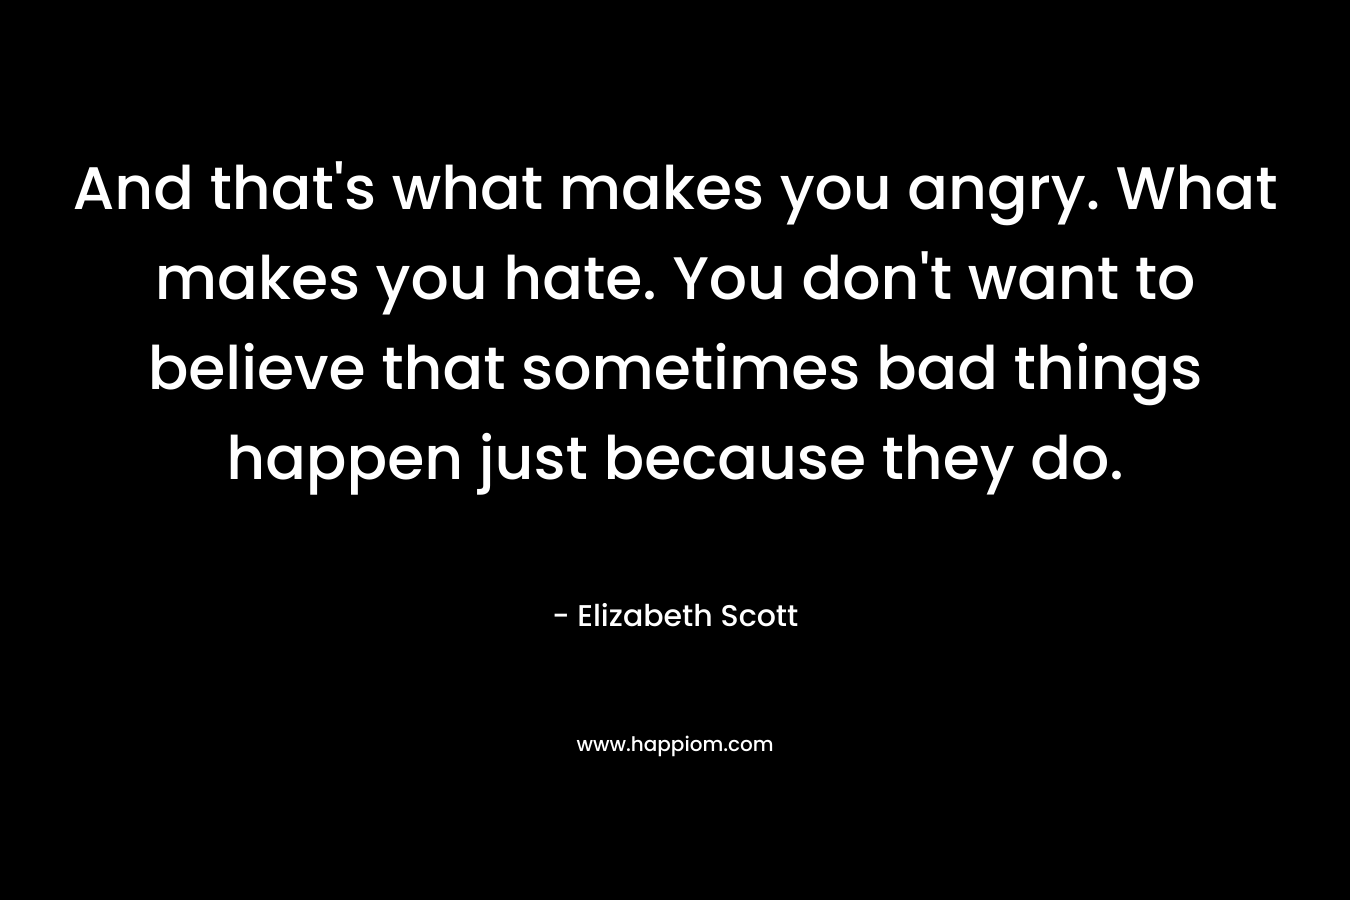 And that’s what makes you angry. What makes you hate. You don’t want to believe that sometimes bad things happen just because they do. – Elizabeth Scott